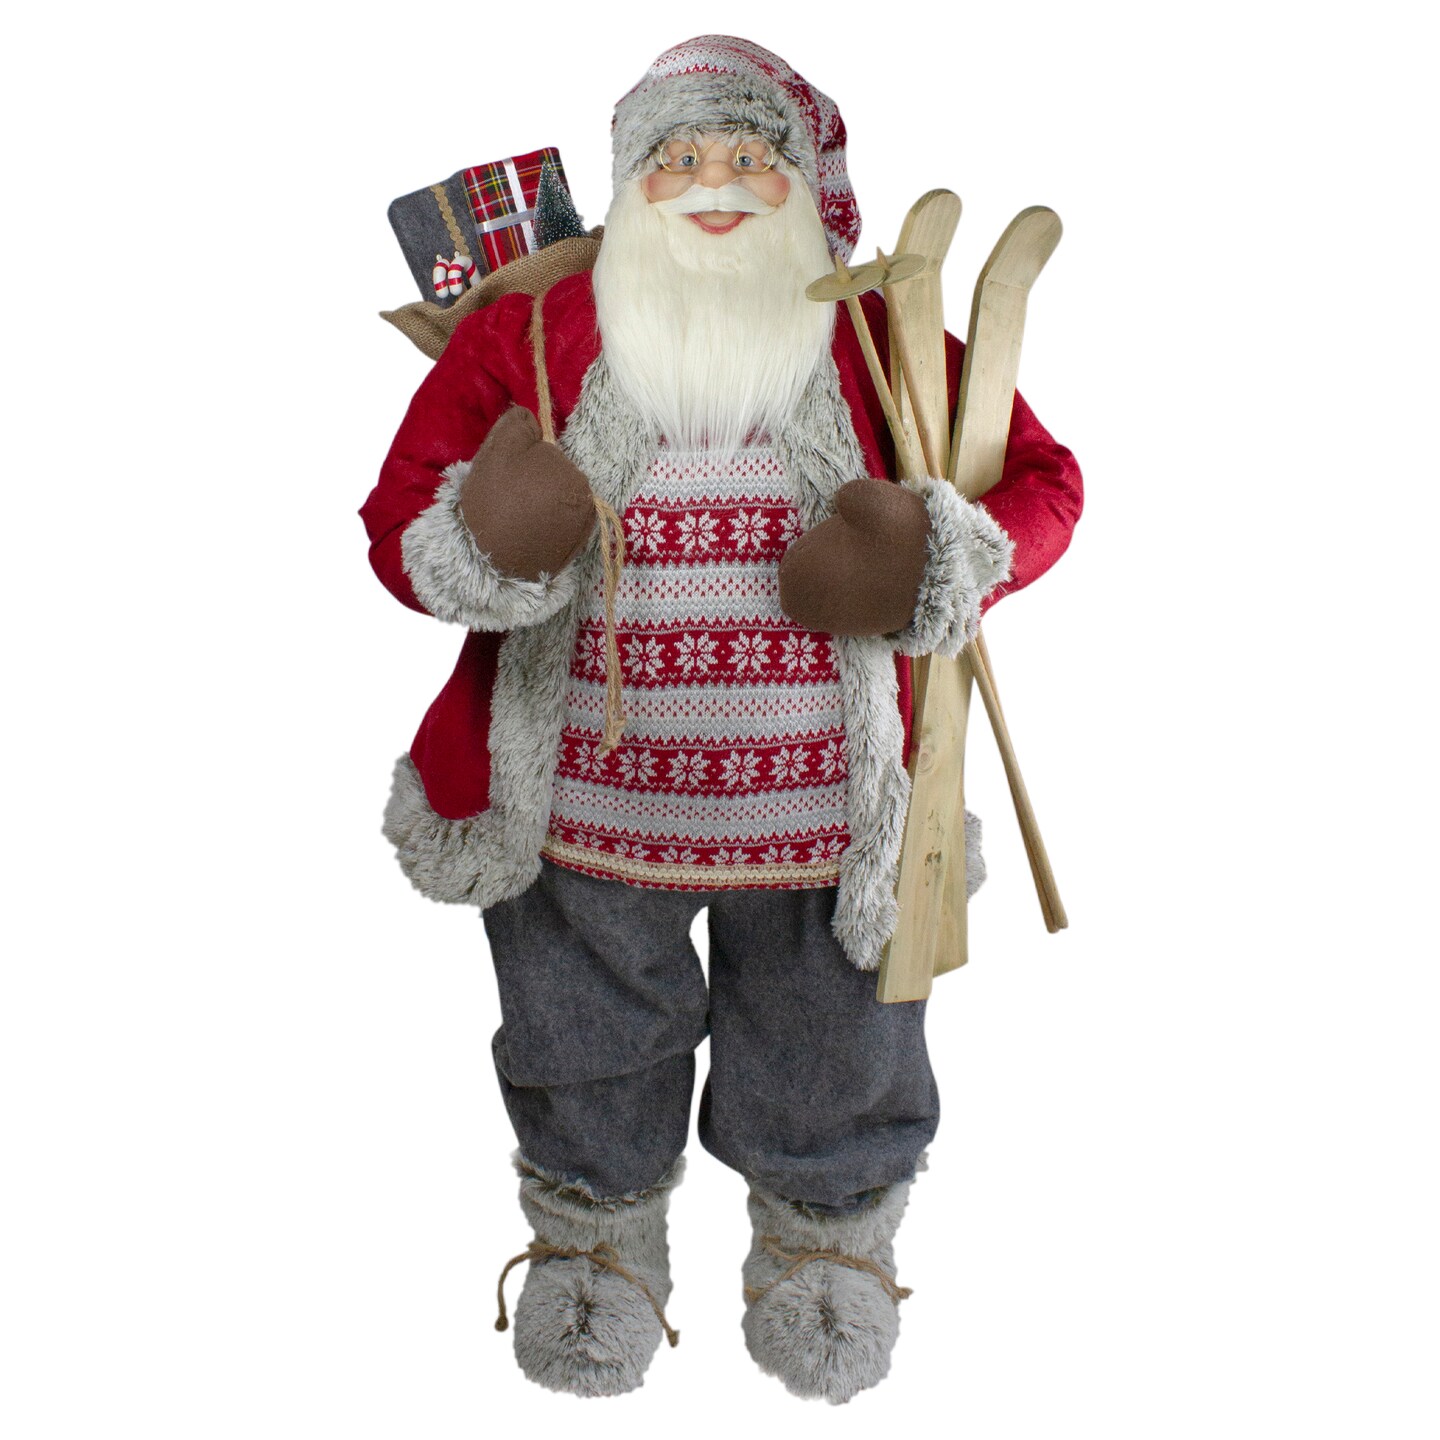 Northlight 4&#x27; Standing Santa Christmas Figure with Skis and Fur Boots